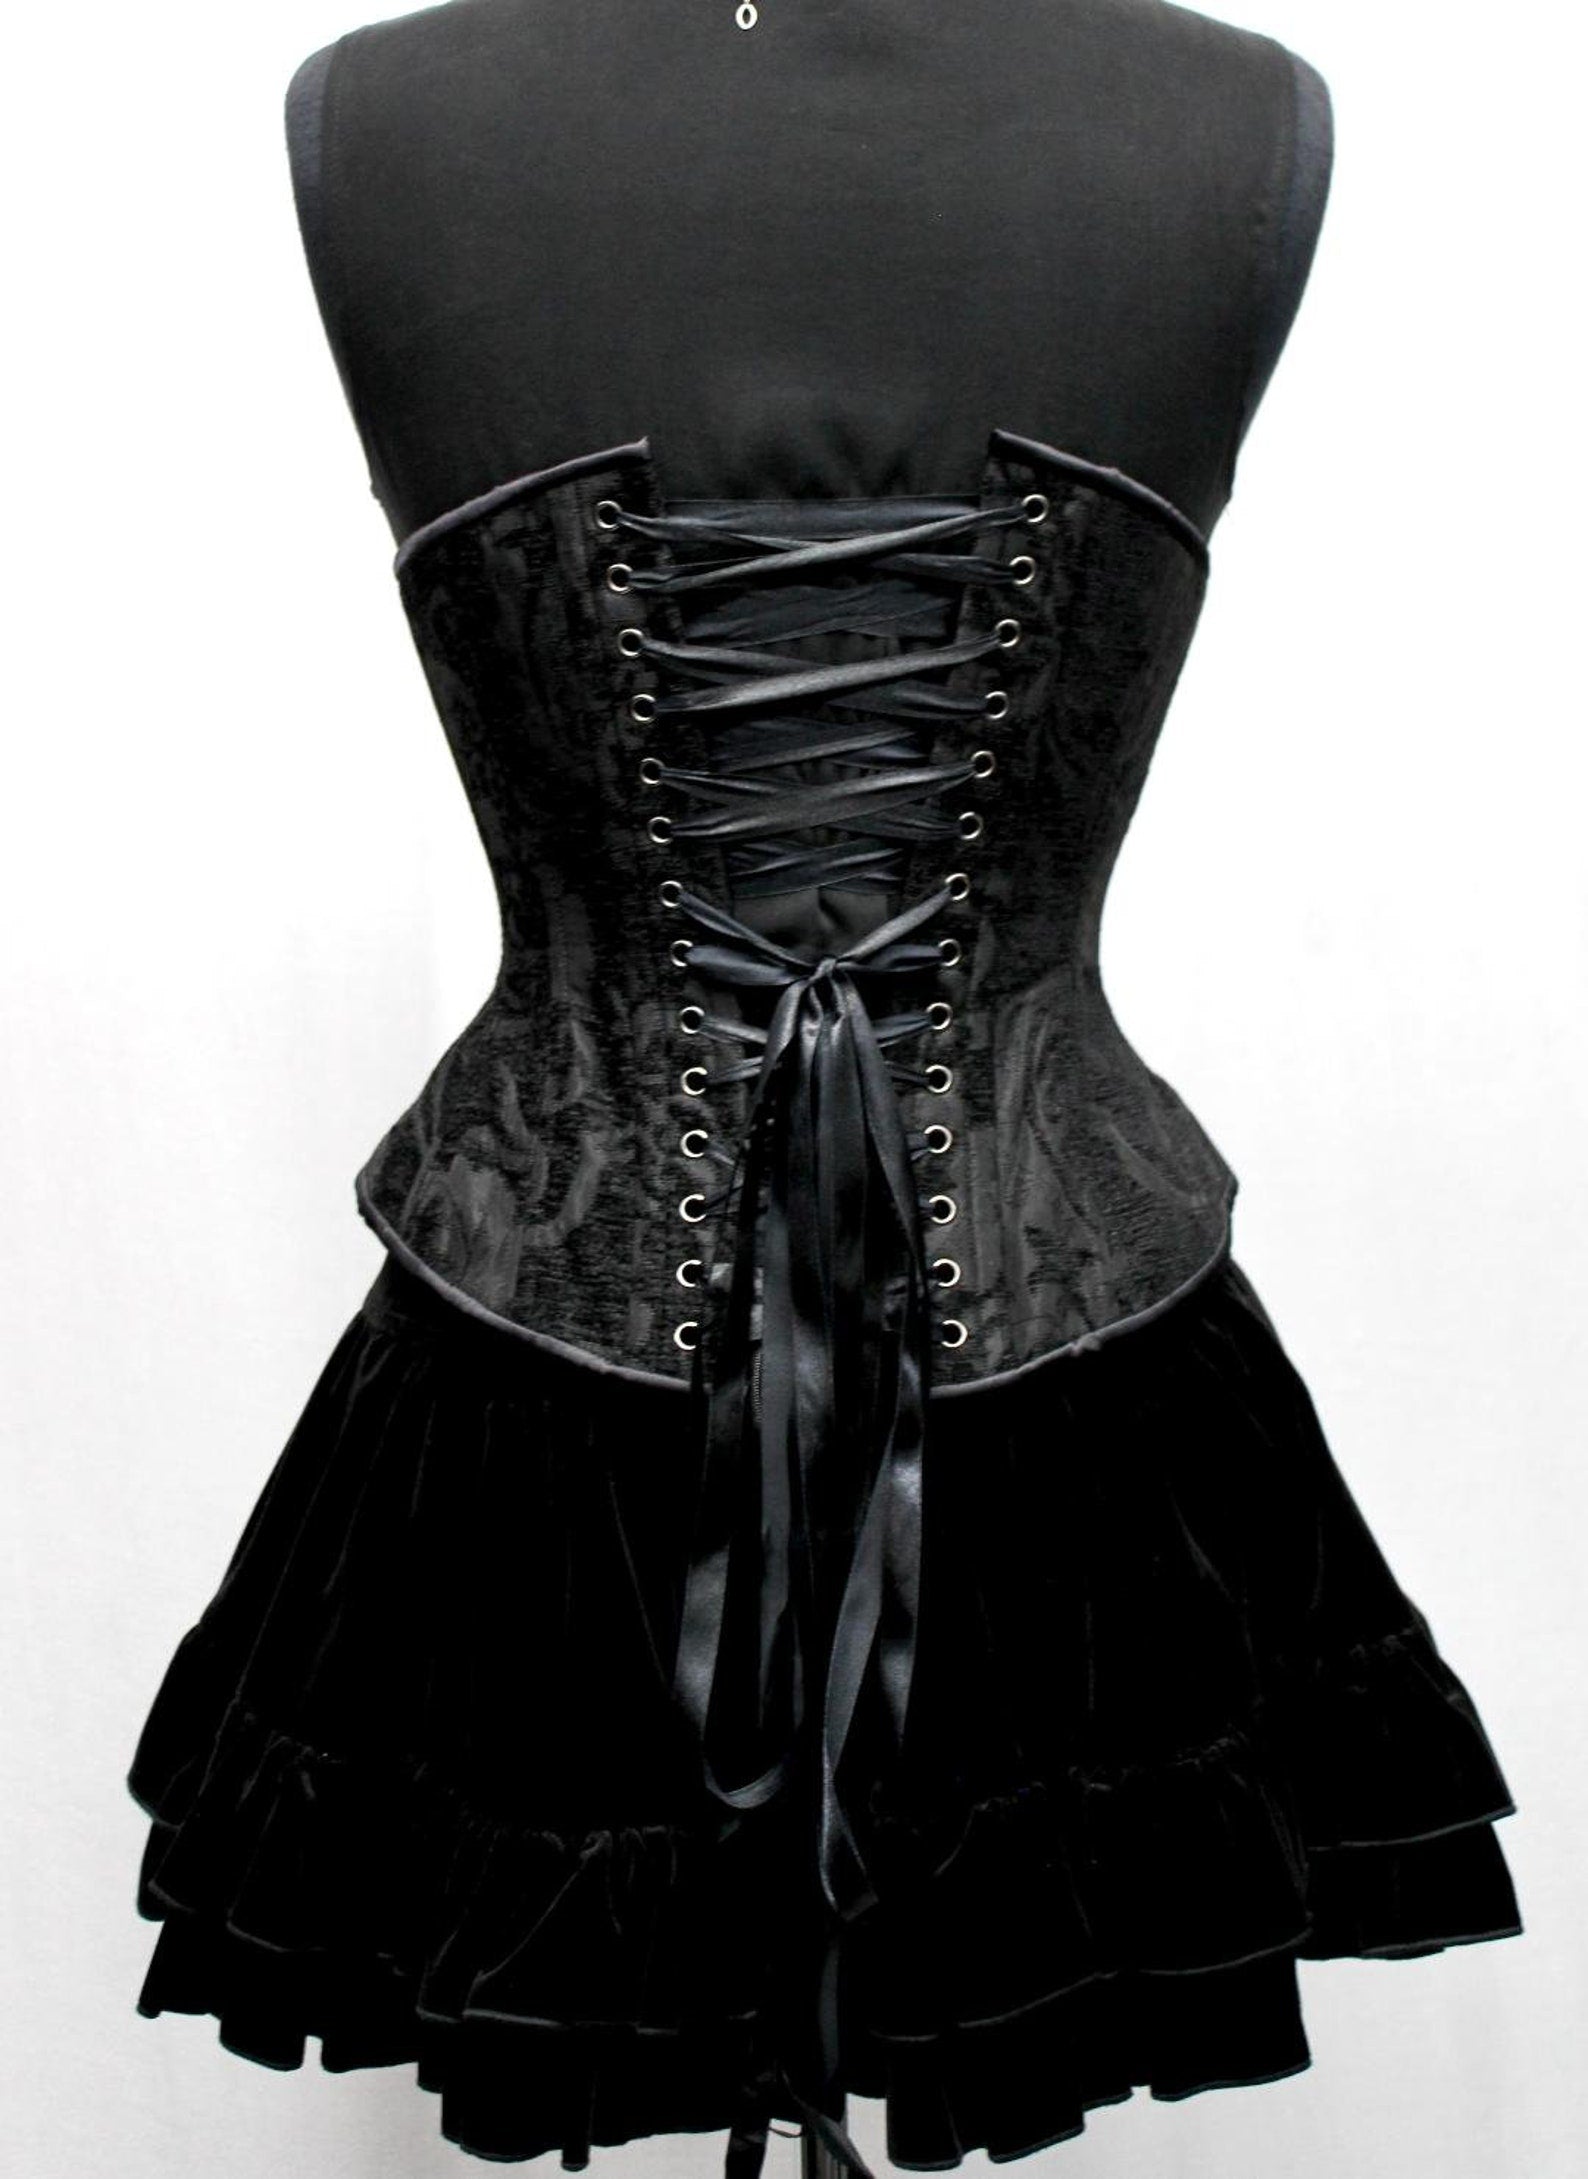 TAPESTRY CORSET - BLACK TAPESTRY by Shrine of Hollywood